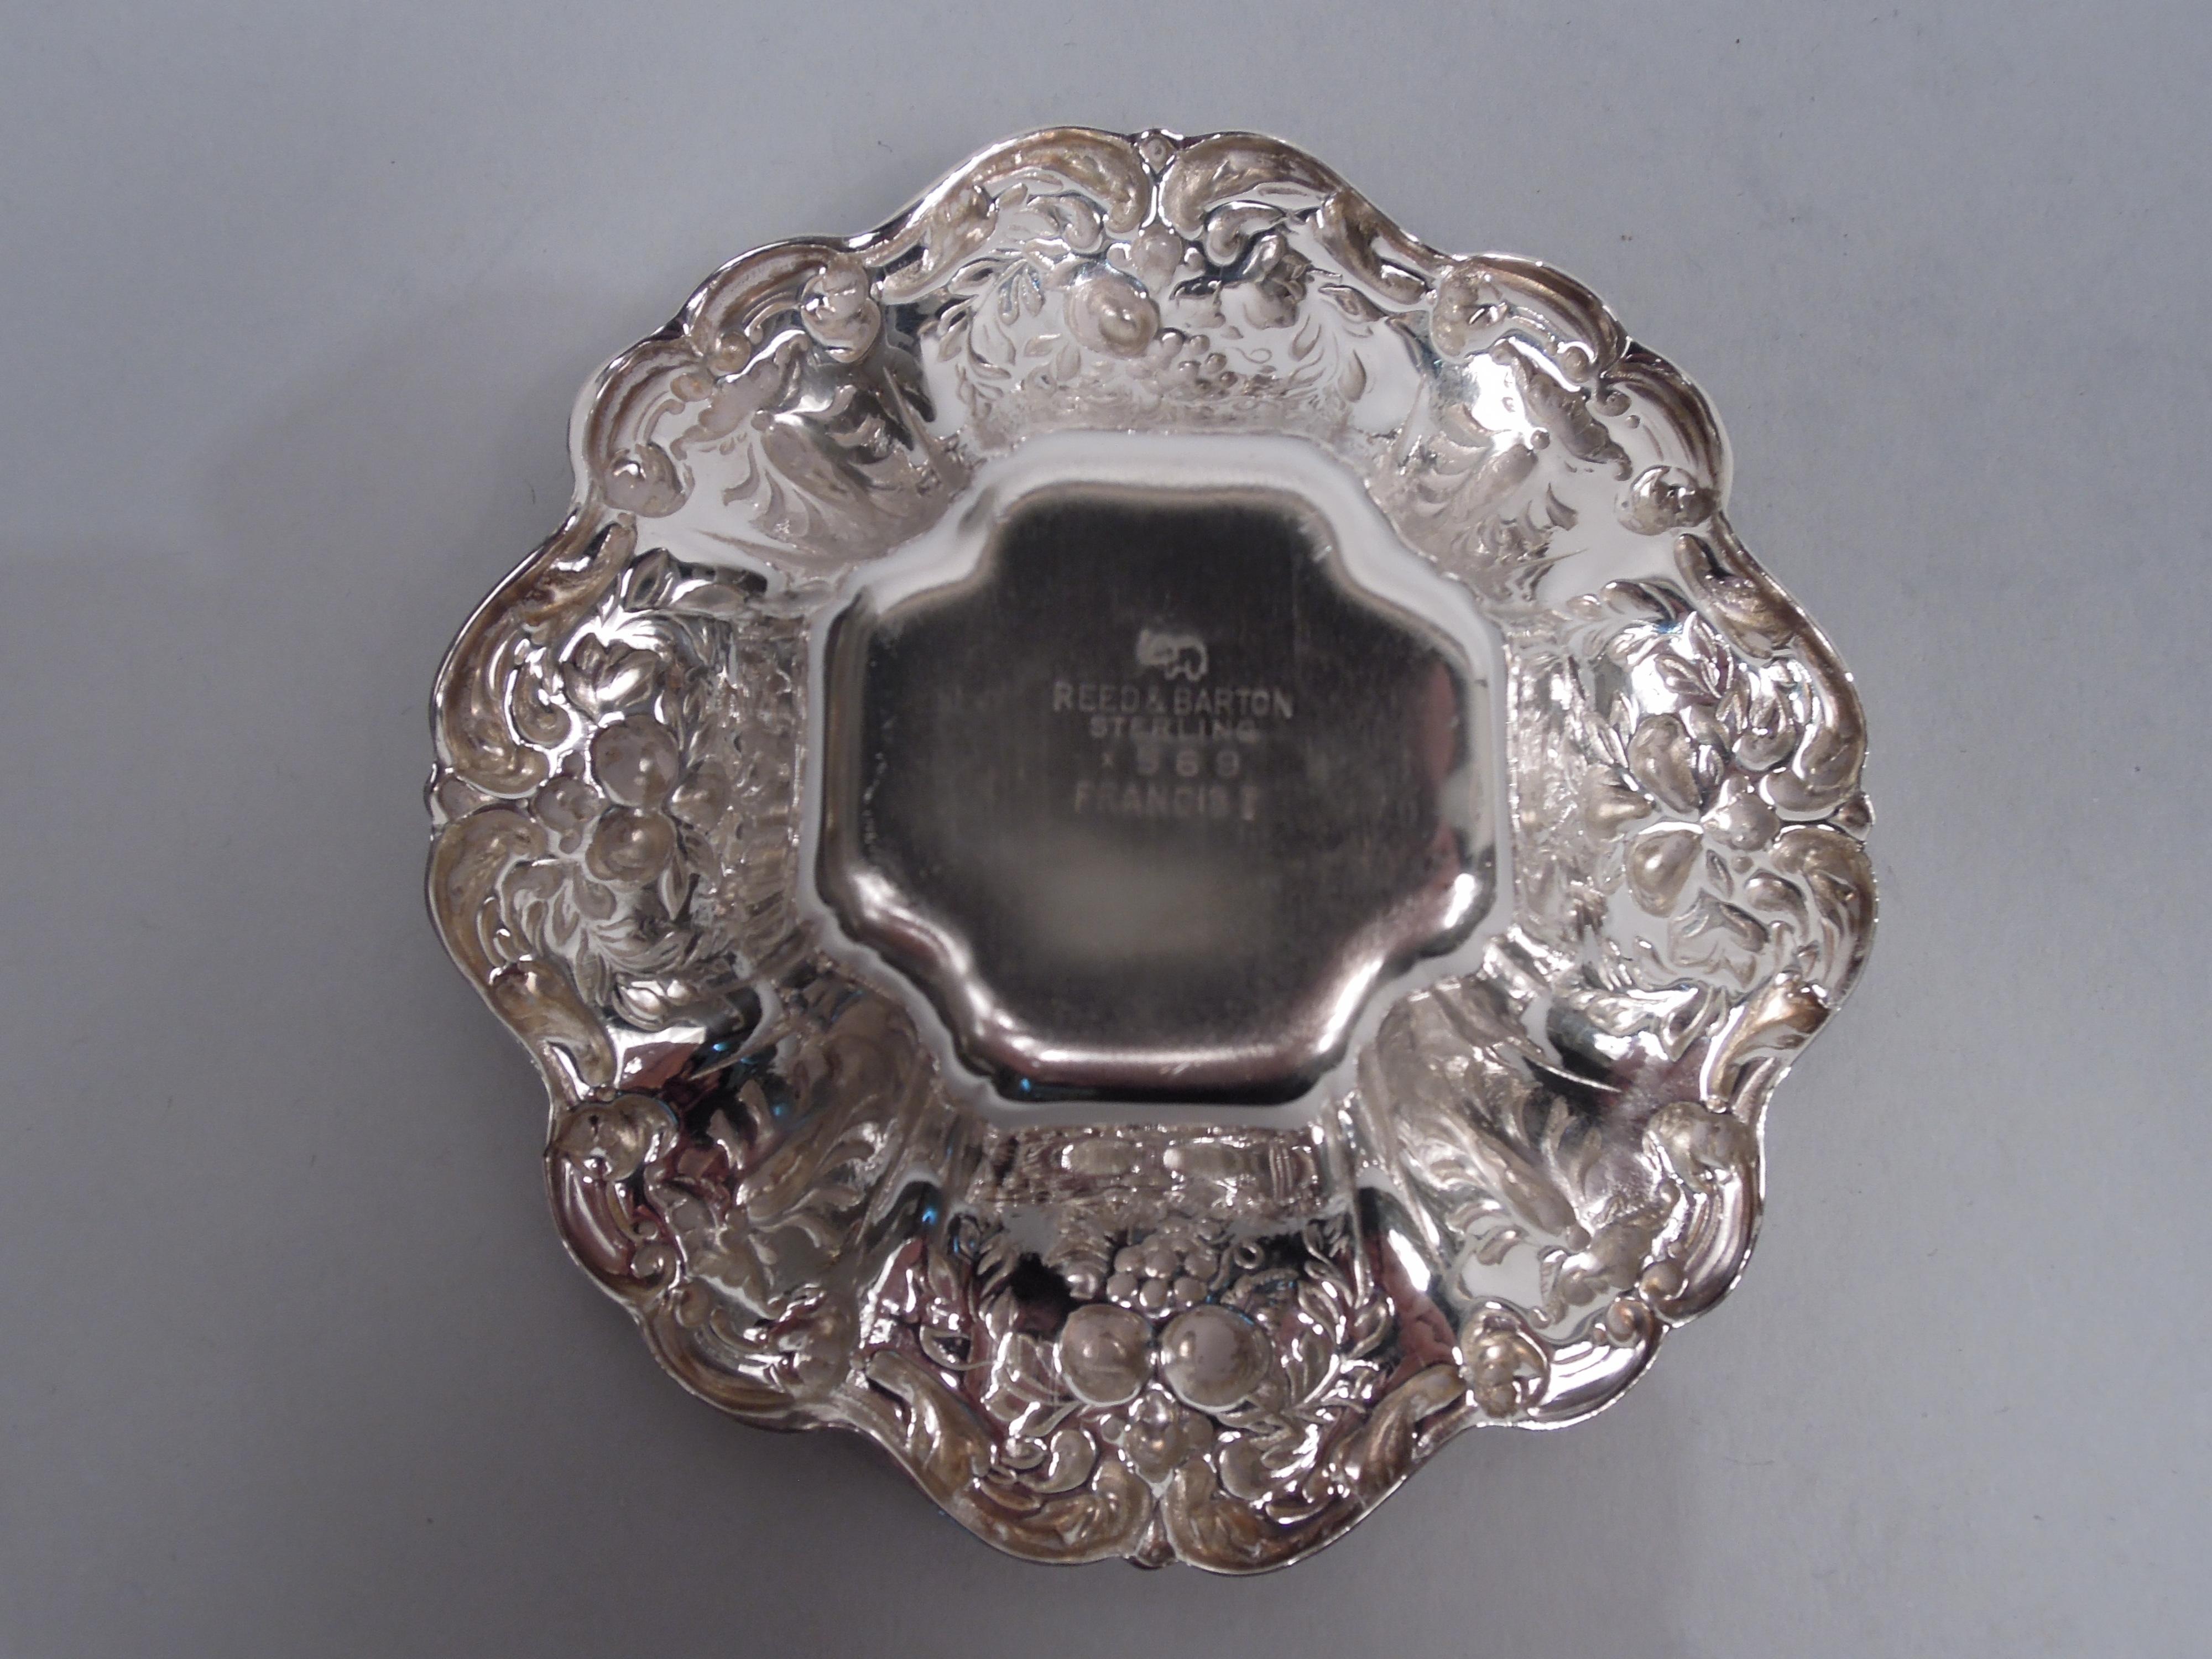 Renaissance Revival Set of 6 Reed & Barton Francis I Sterling Silver Nut Dishes 1952